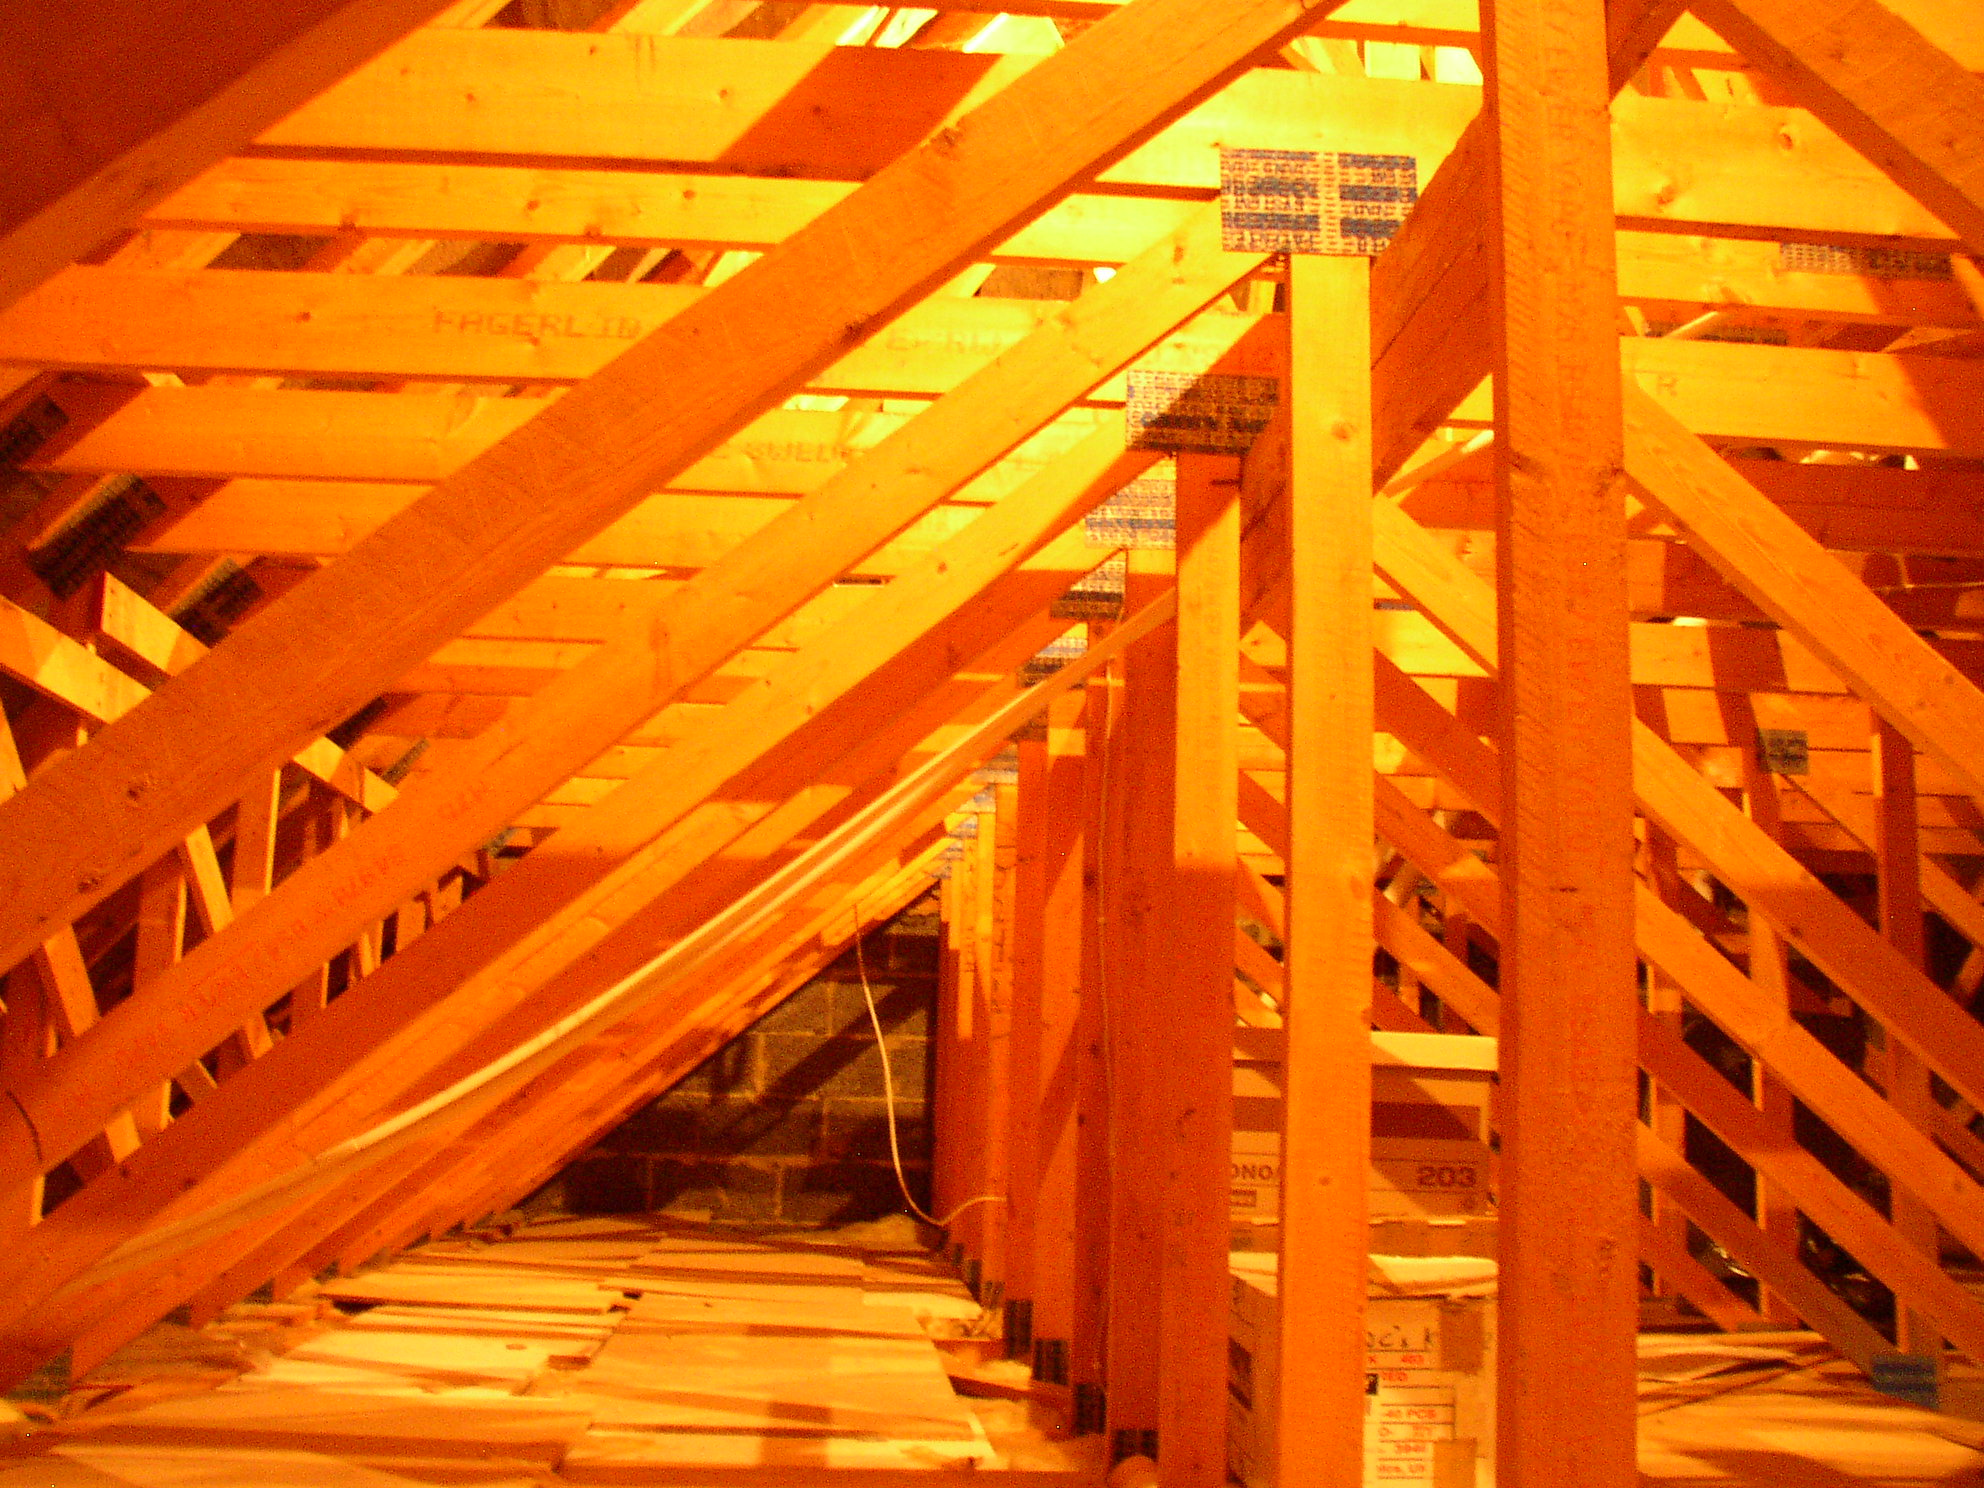 Roof with truss rafters